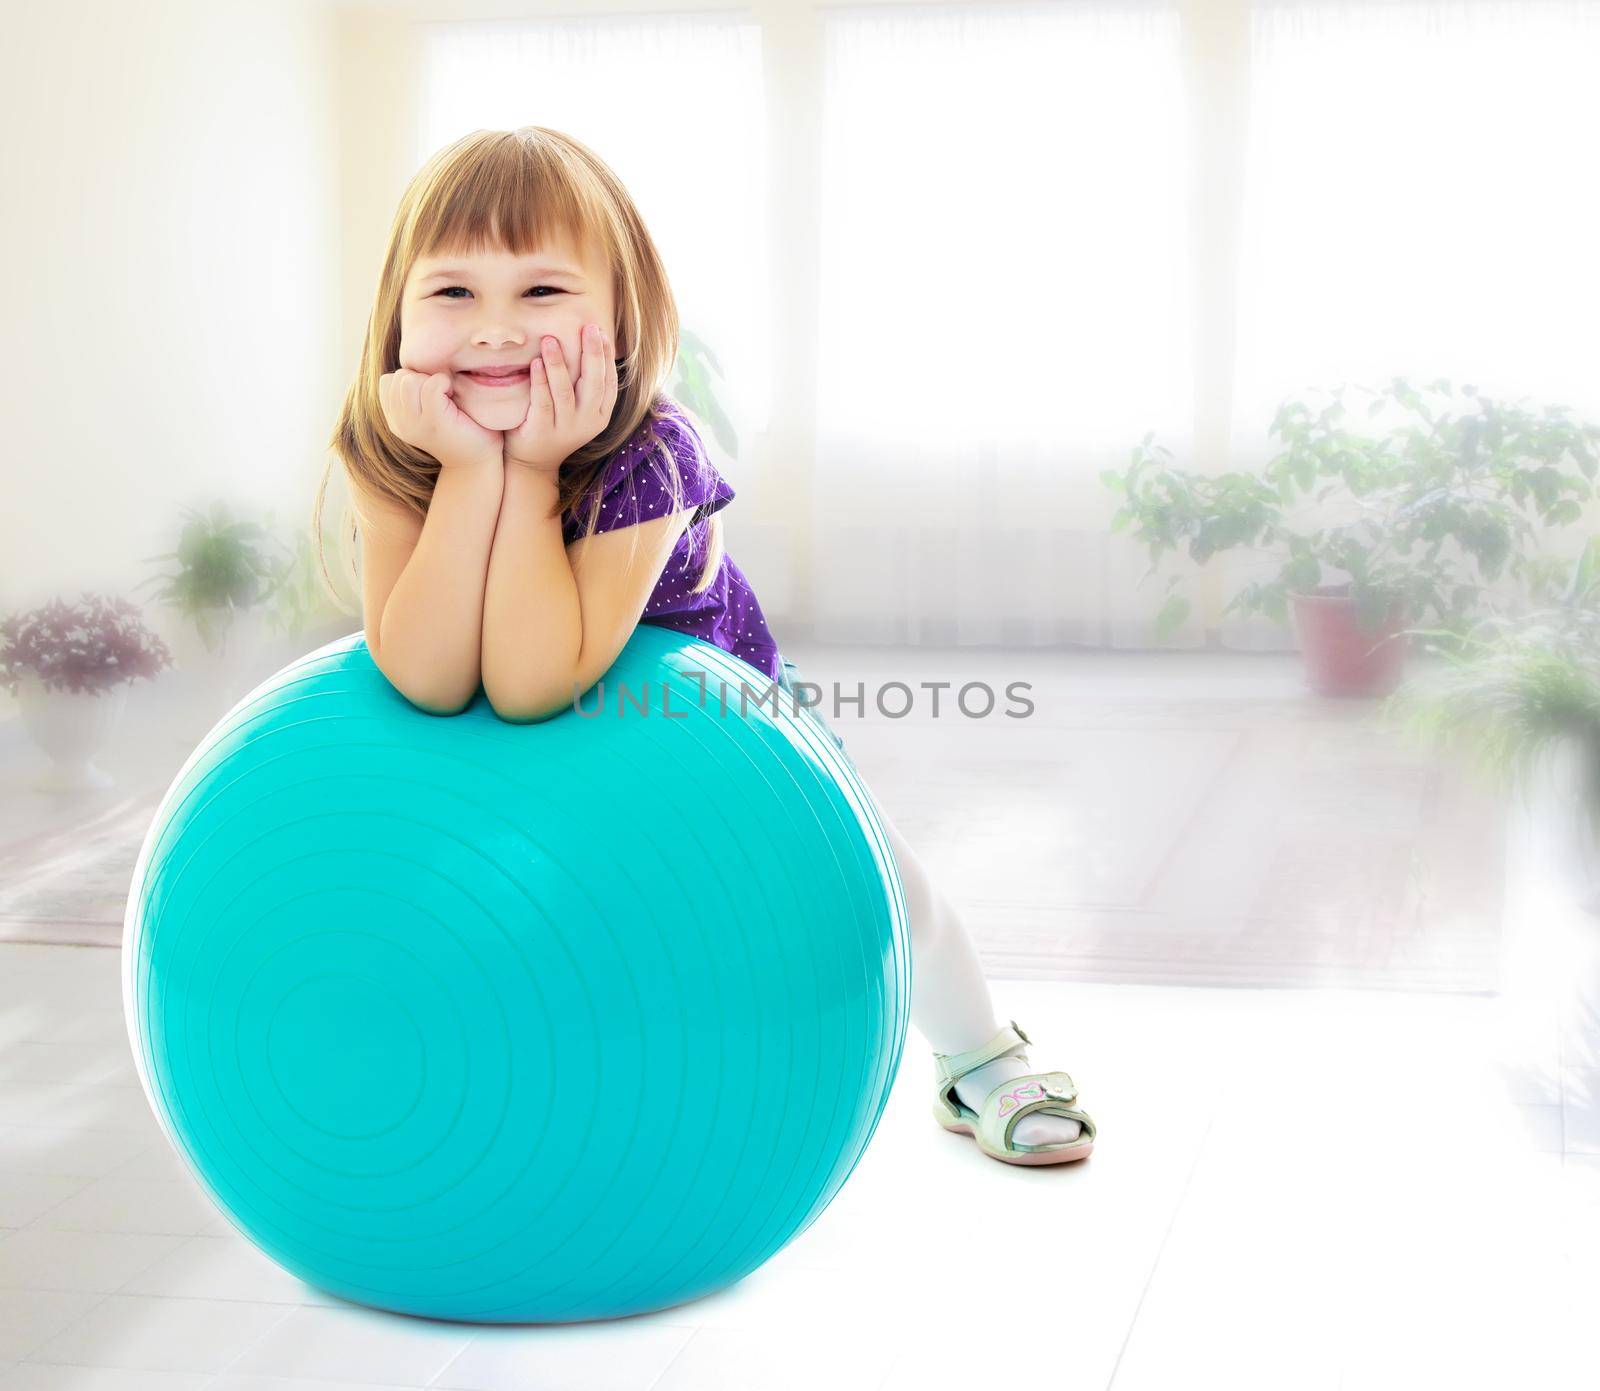 The girl with the ball for fitness by kolesnikov_studio